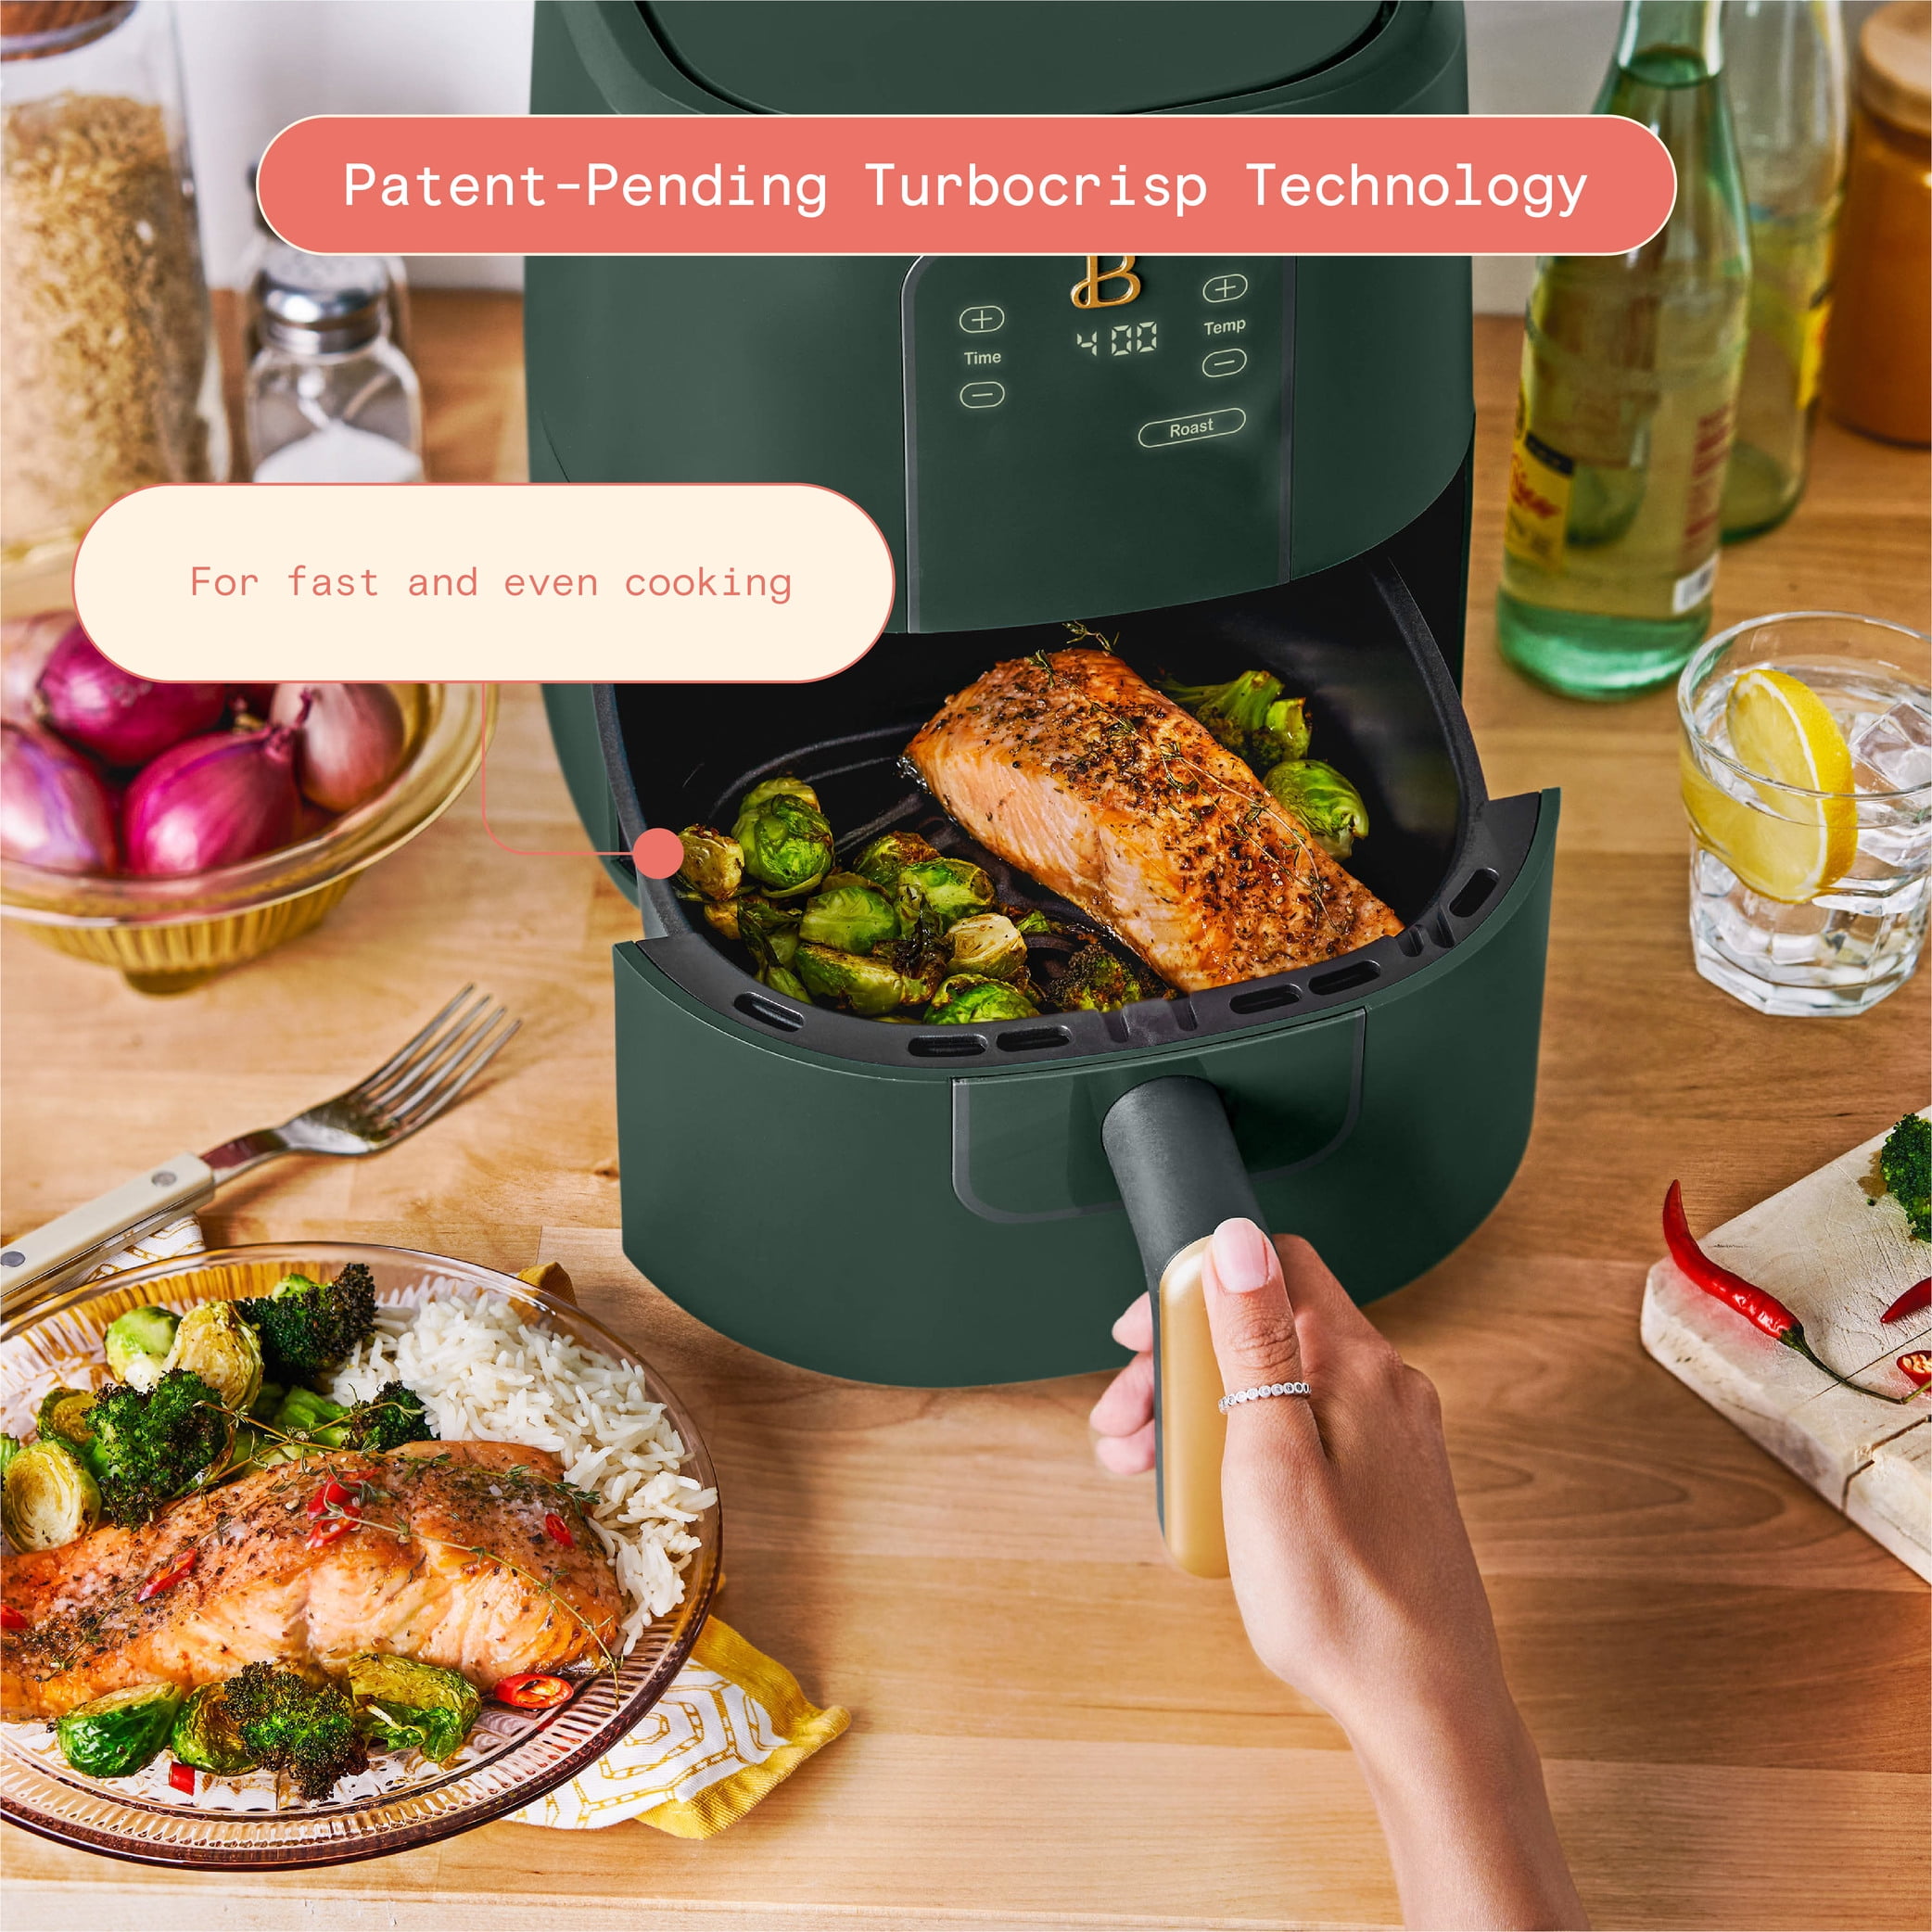 This Air Fryer from Drew Barrymore's Kitchen Line Is on Sale